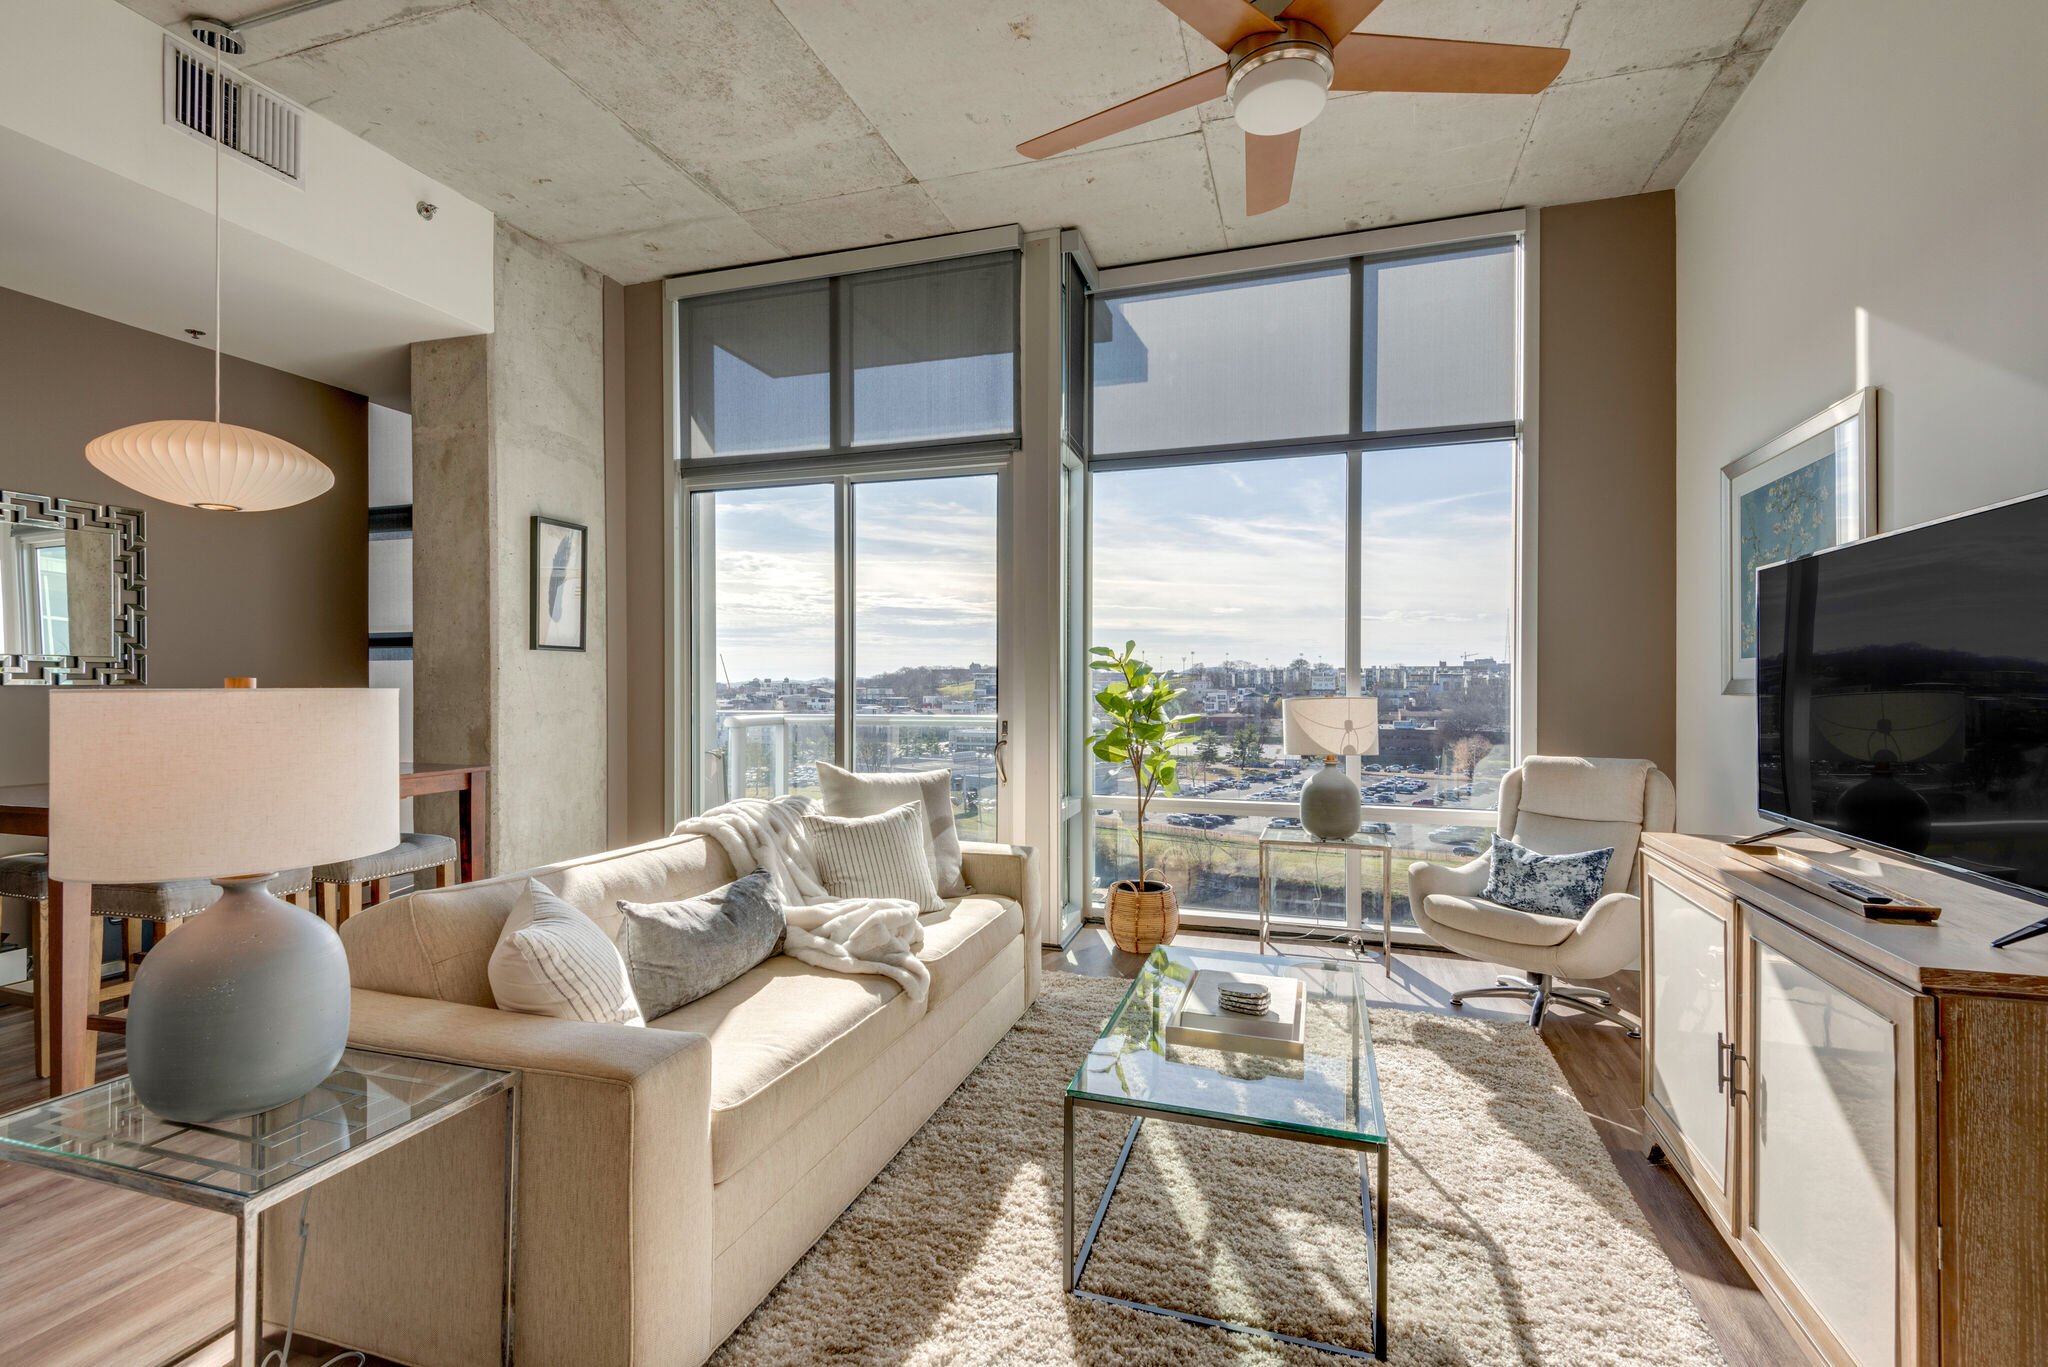   700 12th Ave S #907, NASHVILLE, TN   PURCHASED PRICE $695,000  2 BEDS · 1 BATHS · 1151 SQF 